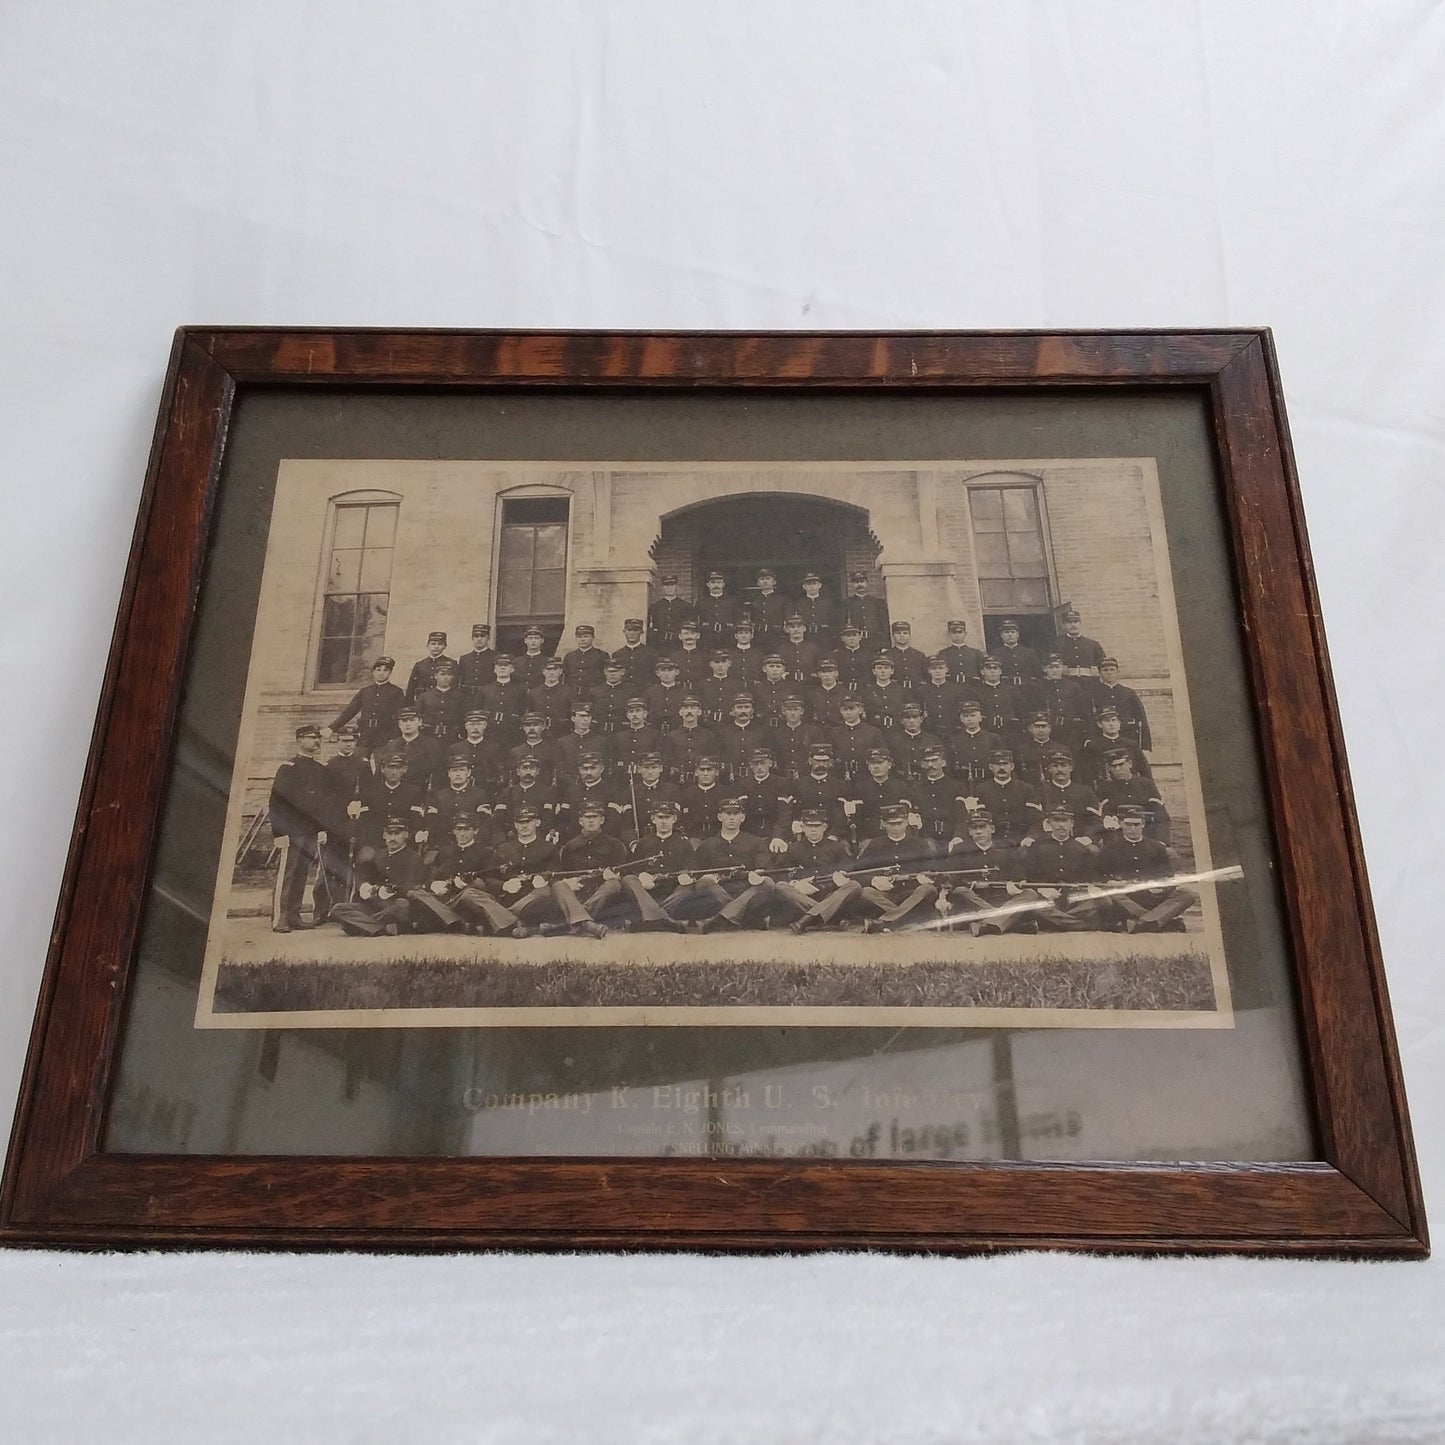 Framed Portrait of Eighth Infantry Division, Company K, at Fort Snelling, Minnesota c. 1900